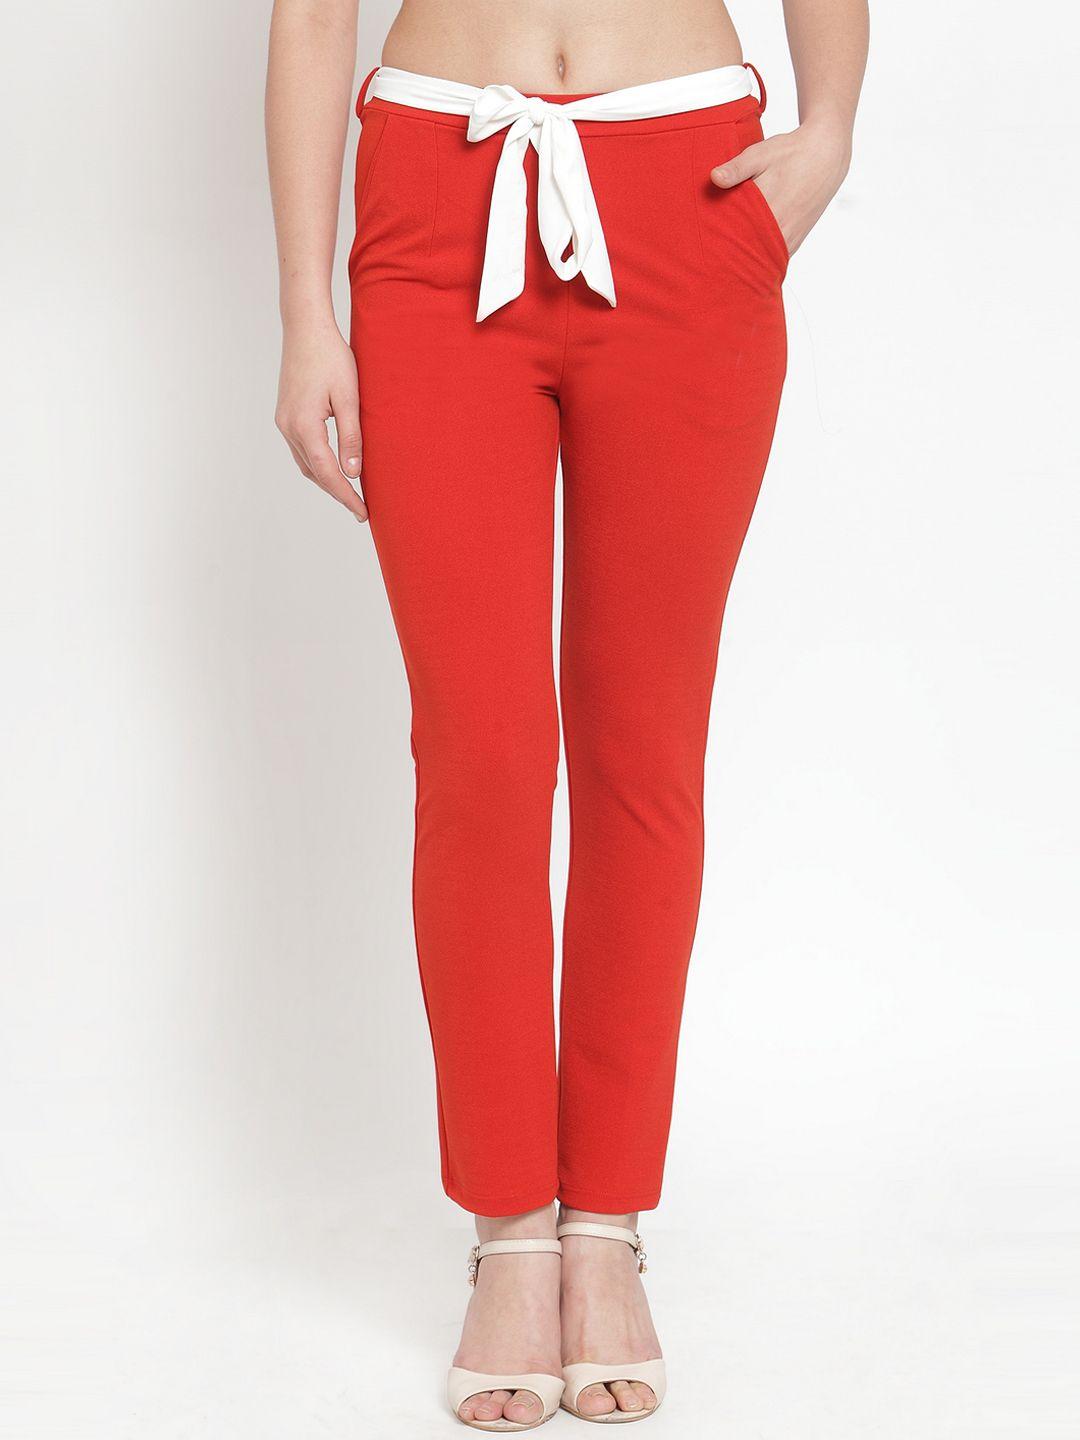 kassually-women-rust-red-slim-fit-solid-peg-trousers